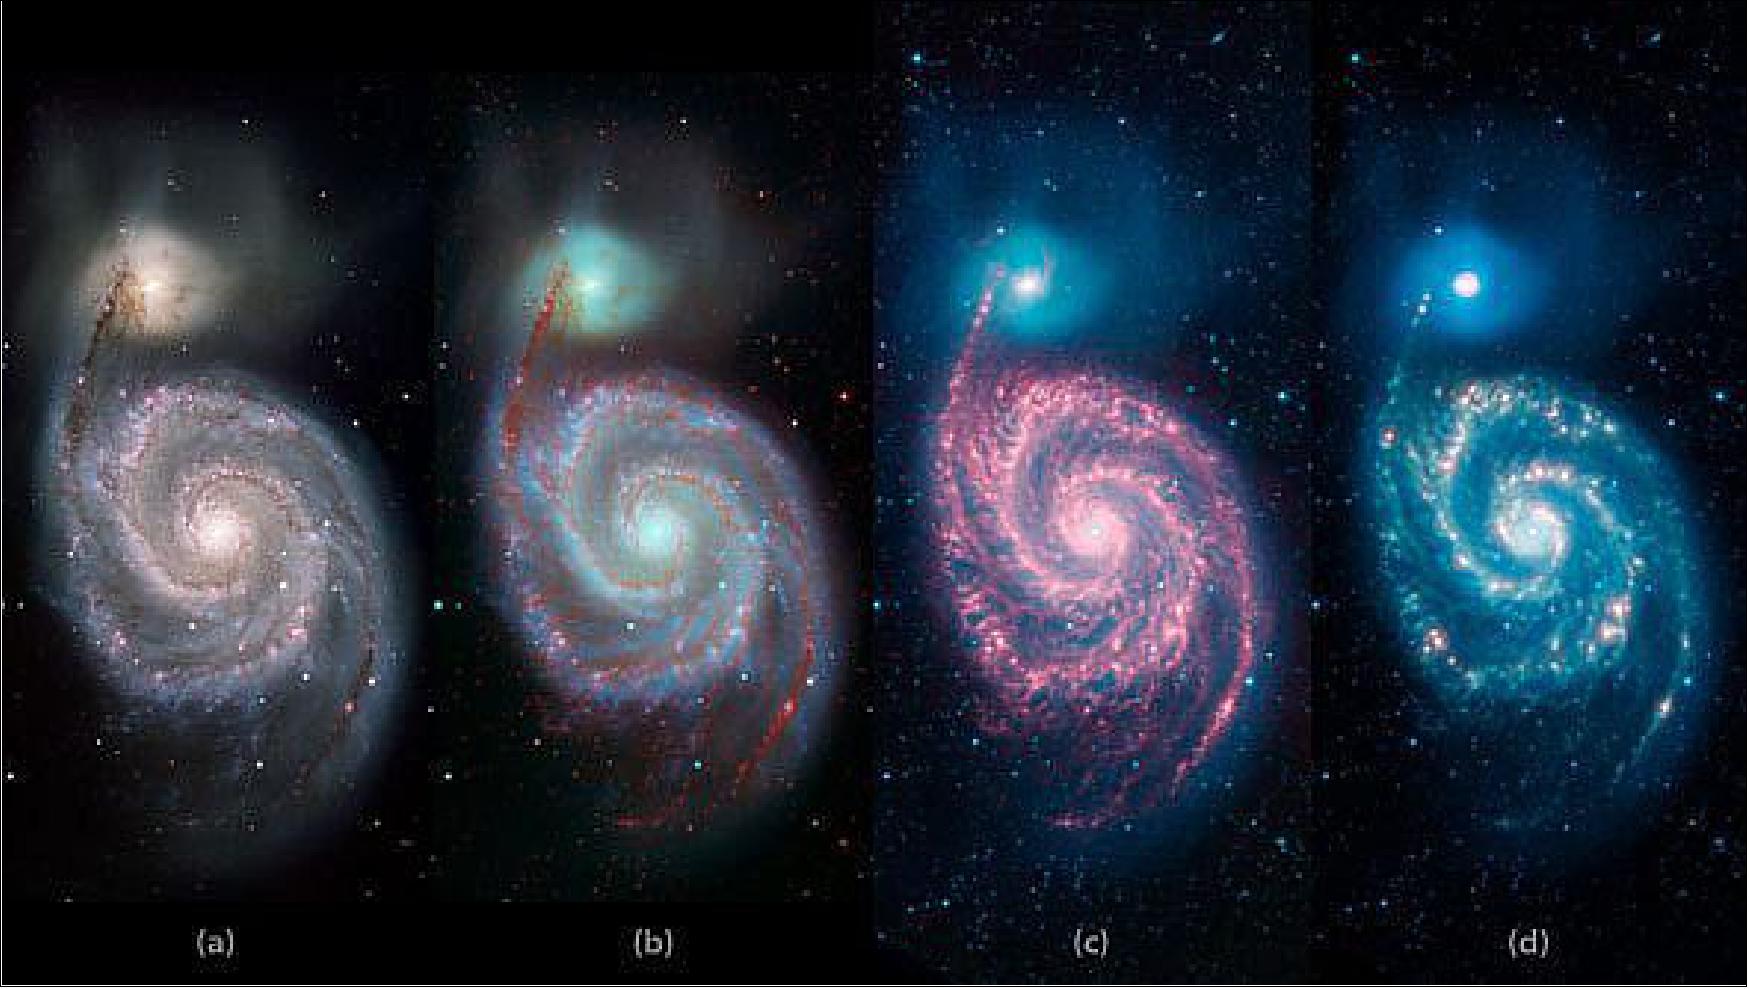 Figure 43: The Whirlpool galaxy, also known as Messier 51 and NGC 5194/5195, is actually a pair of galaxies that are tugging and distorting each other through their mutual gravitational attraction. Located approximately 23 million light-years away, it resides in the constellation Canes Venatici (image credit: NASA/JPL-Caltech)